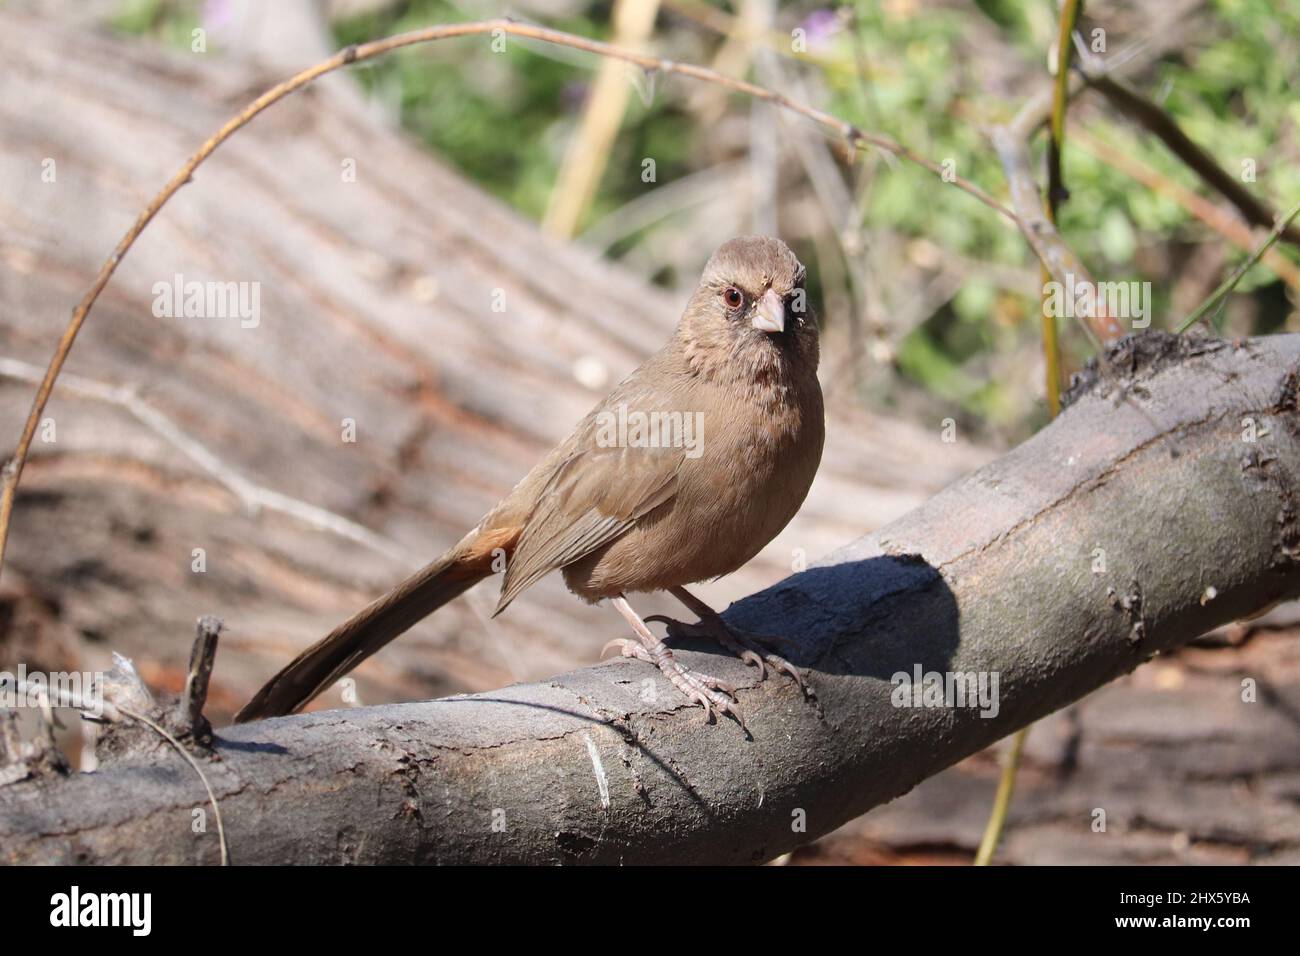 Albert's Towhee or Melozone aberti perching on branch at the Riparian water ranch in Arizona. Stock Photo